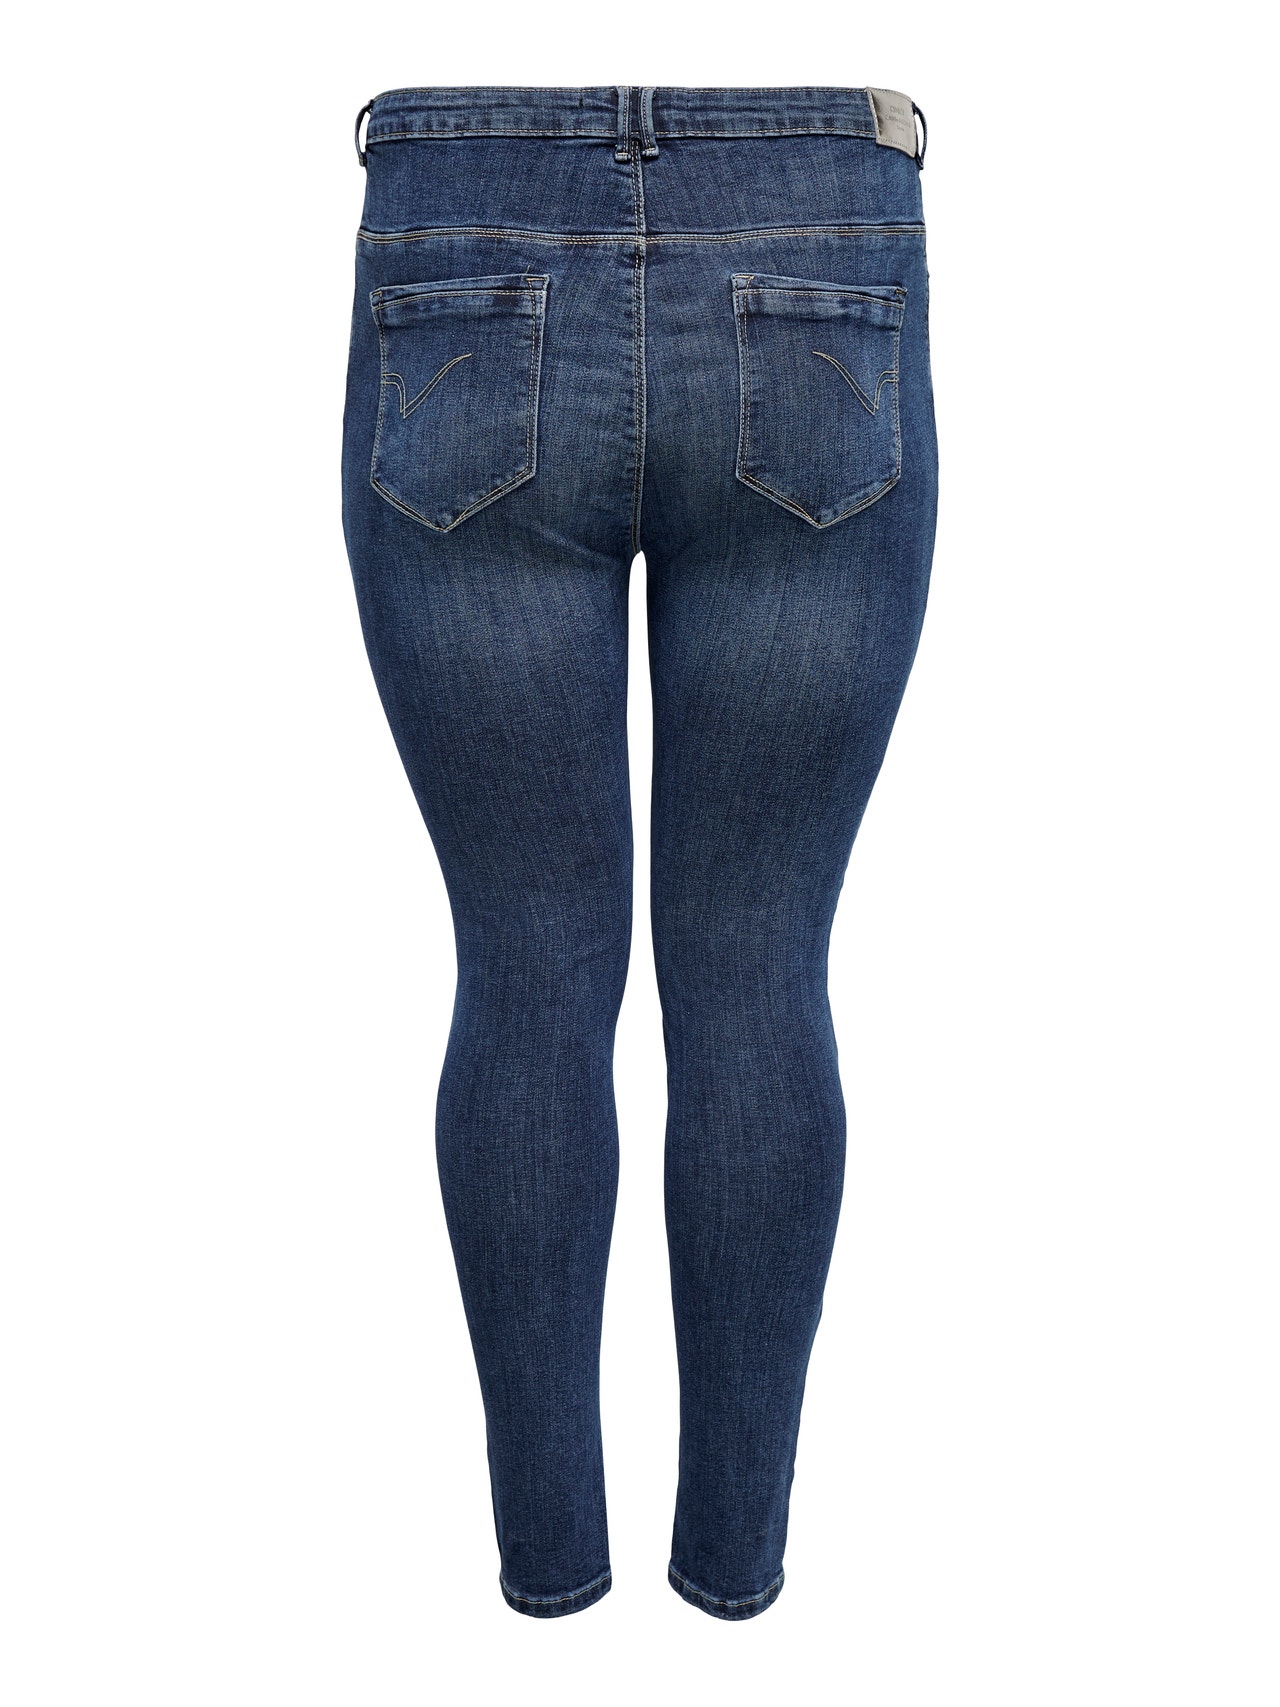 ONLY Skinny Fit Hohe Taille Jeans -Dark Blue Denim - 15225735